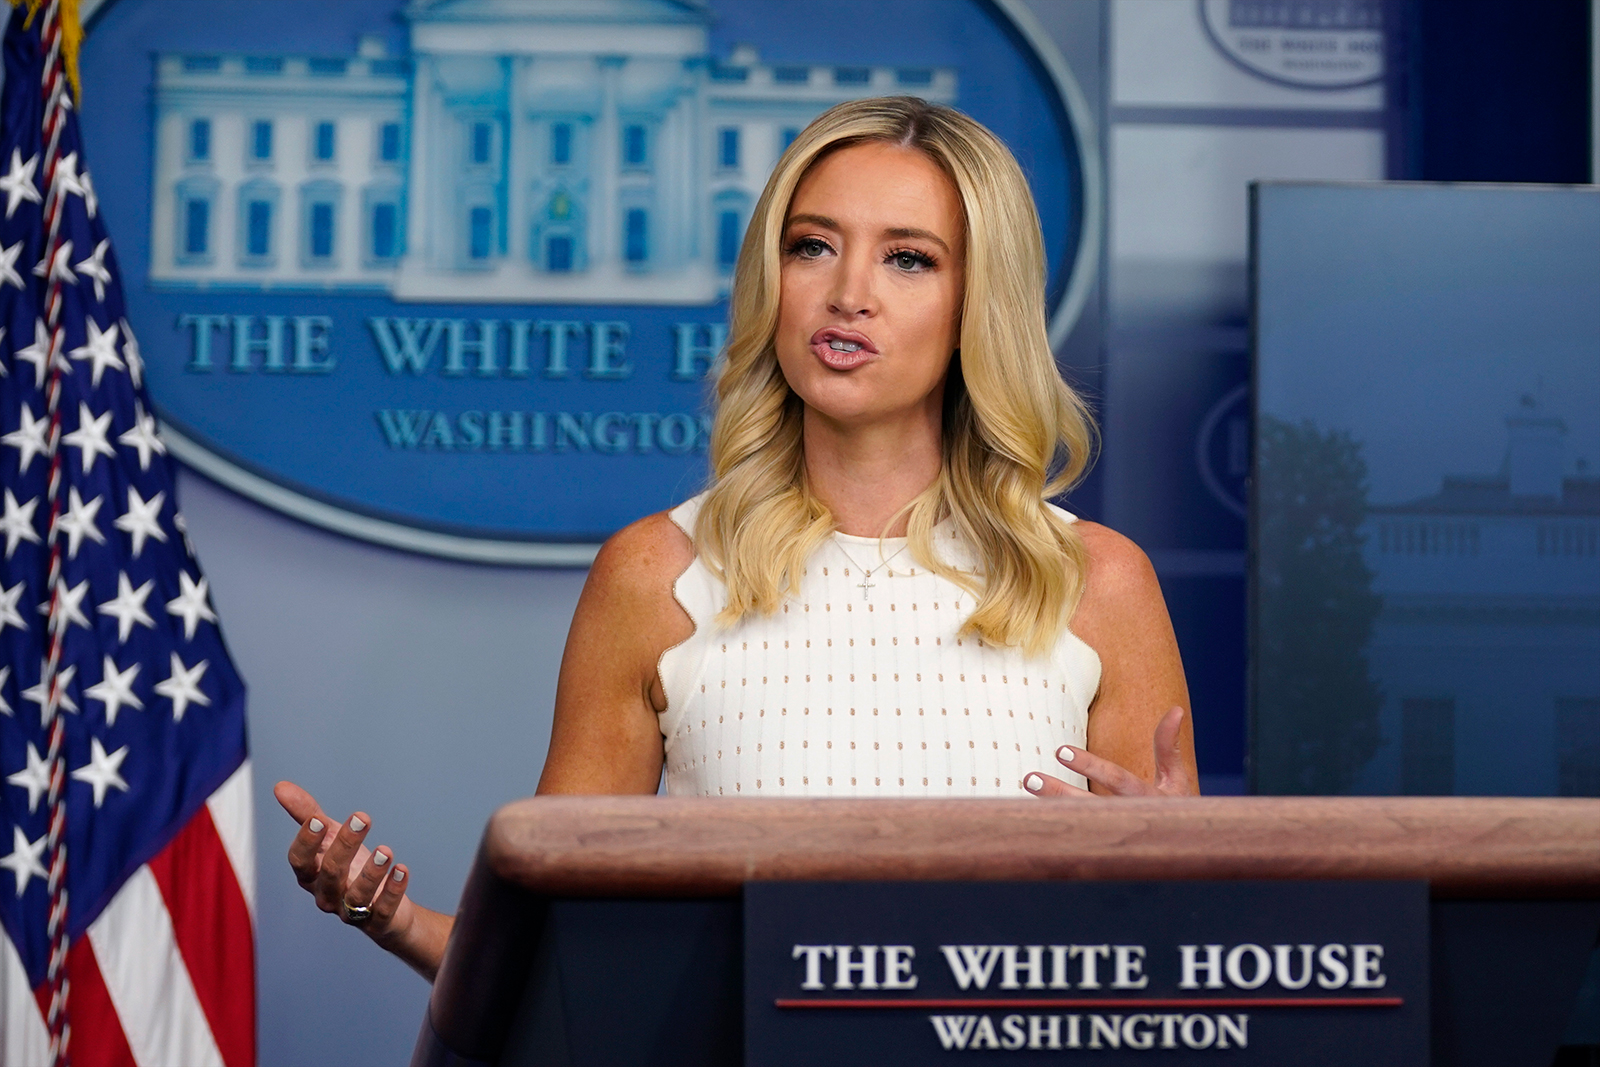 White House press secretary Kayleigh McEnany speaks during a press briefing at the White House in Washington, DC on July 9.